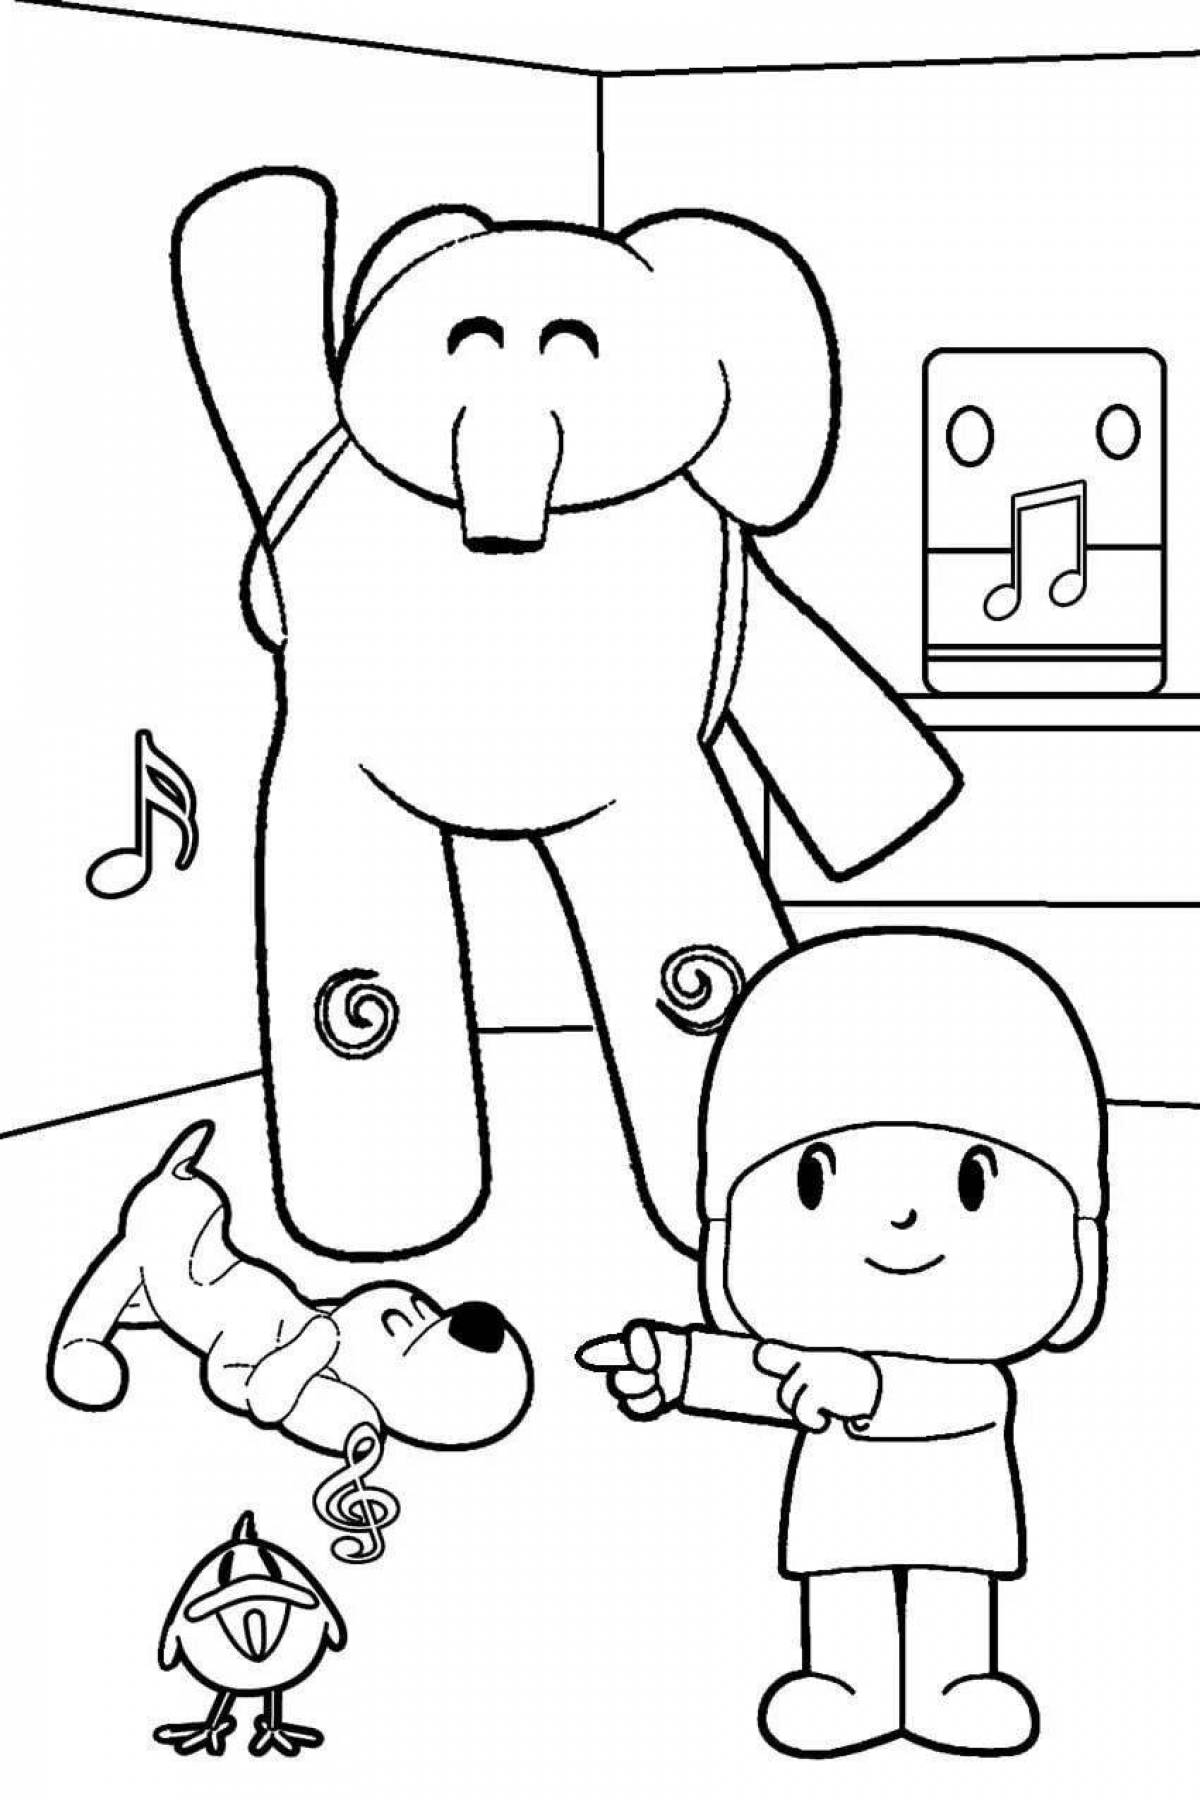 Pocoyo coloring pages with crazy color